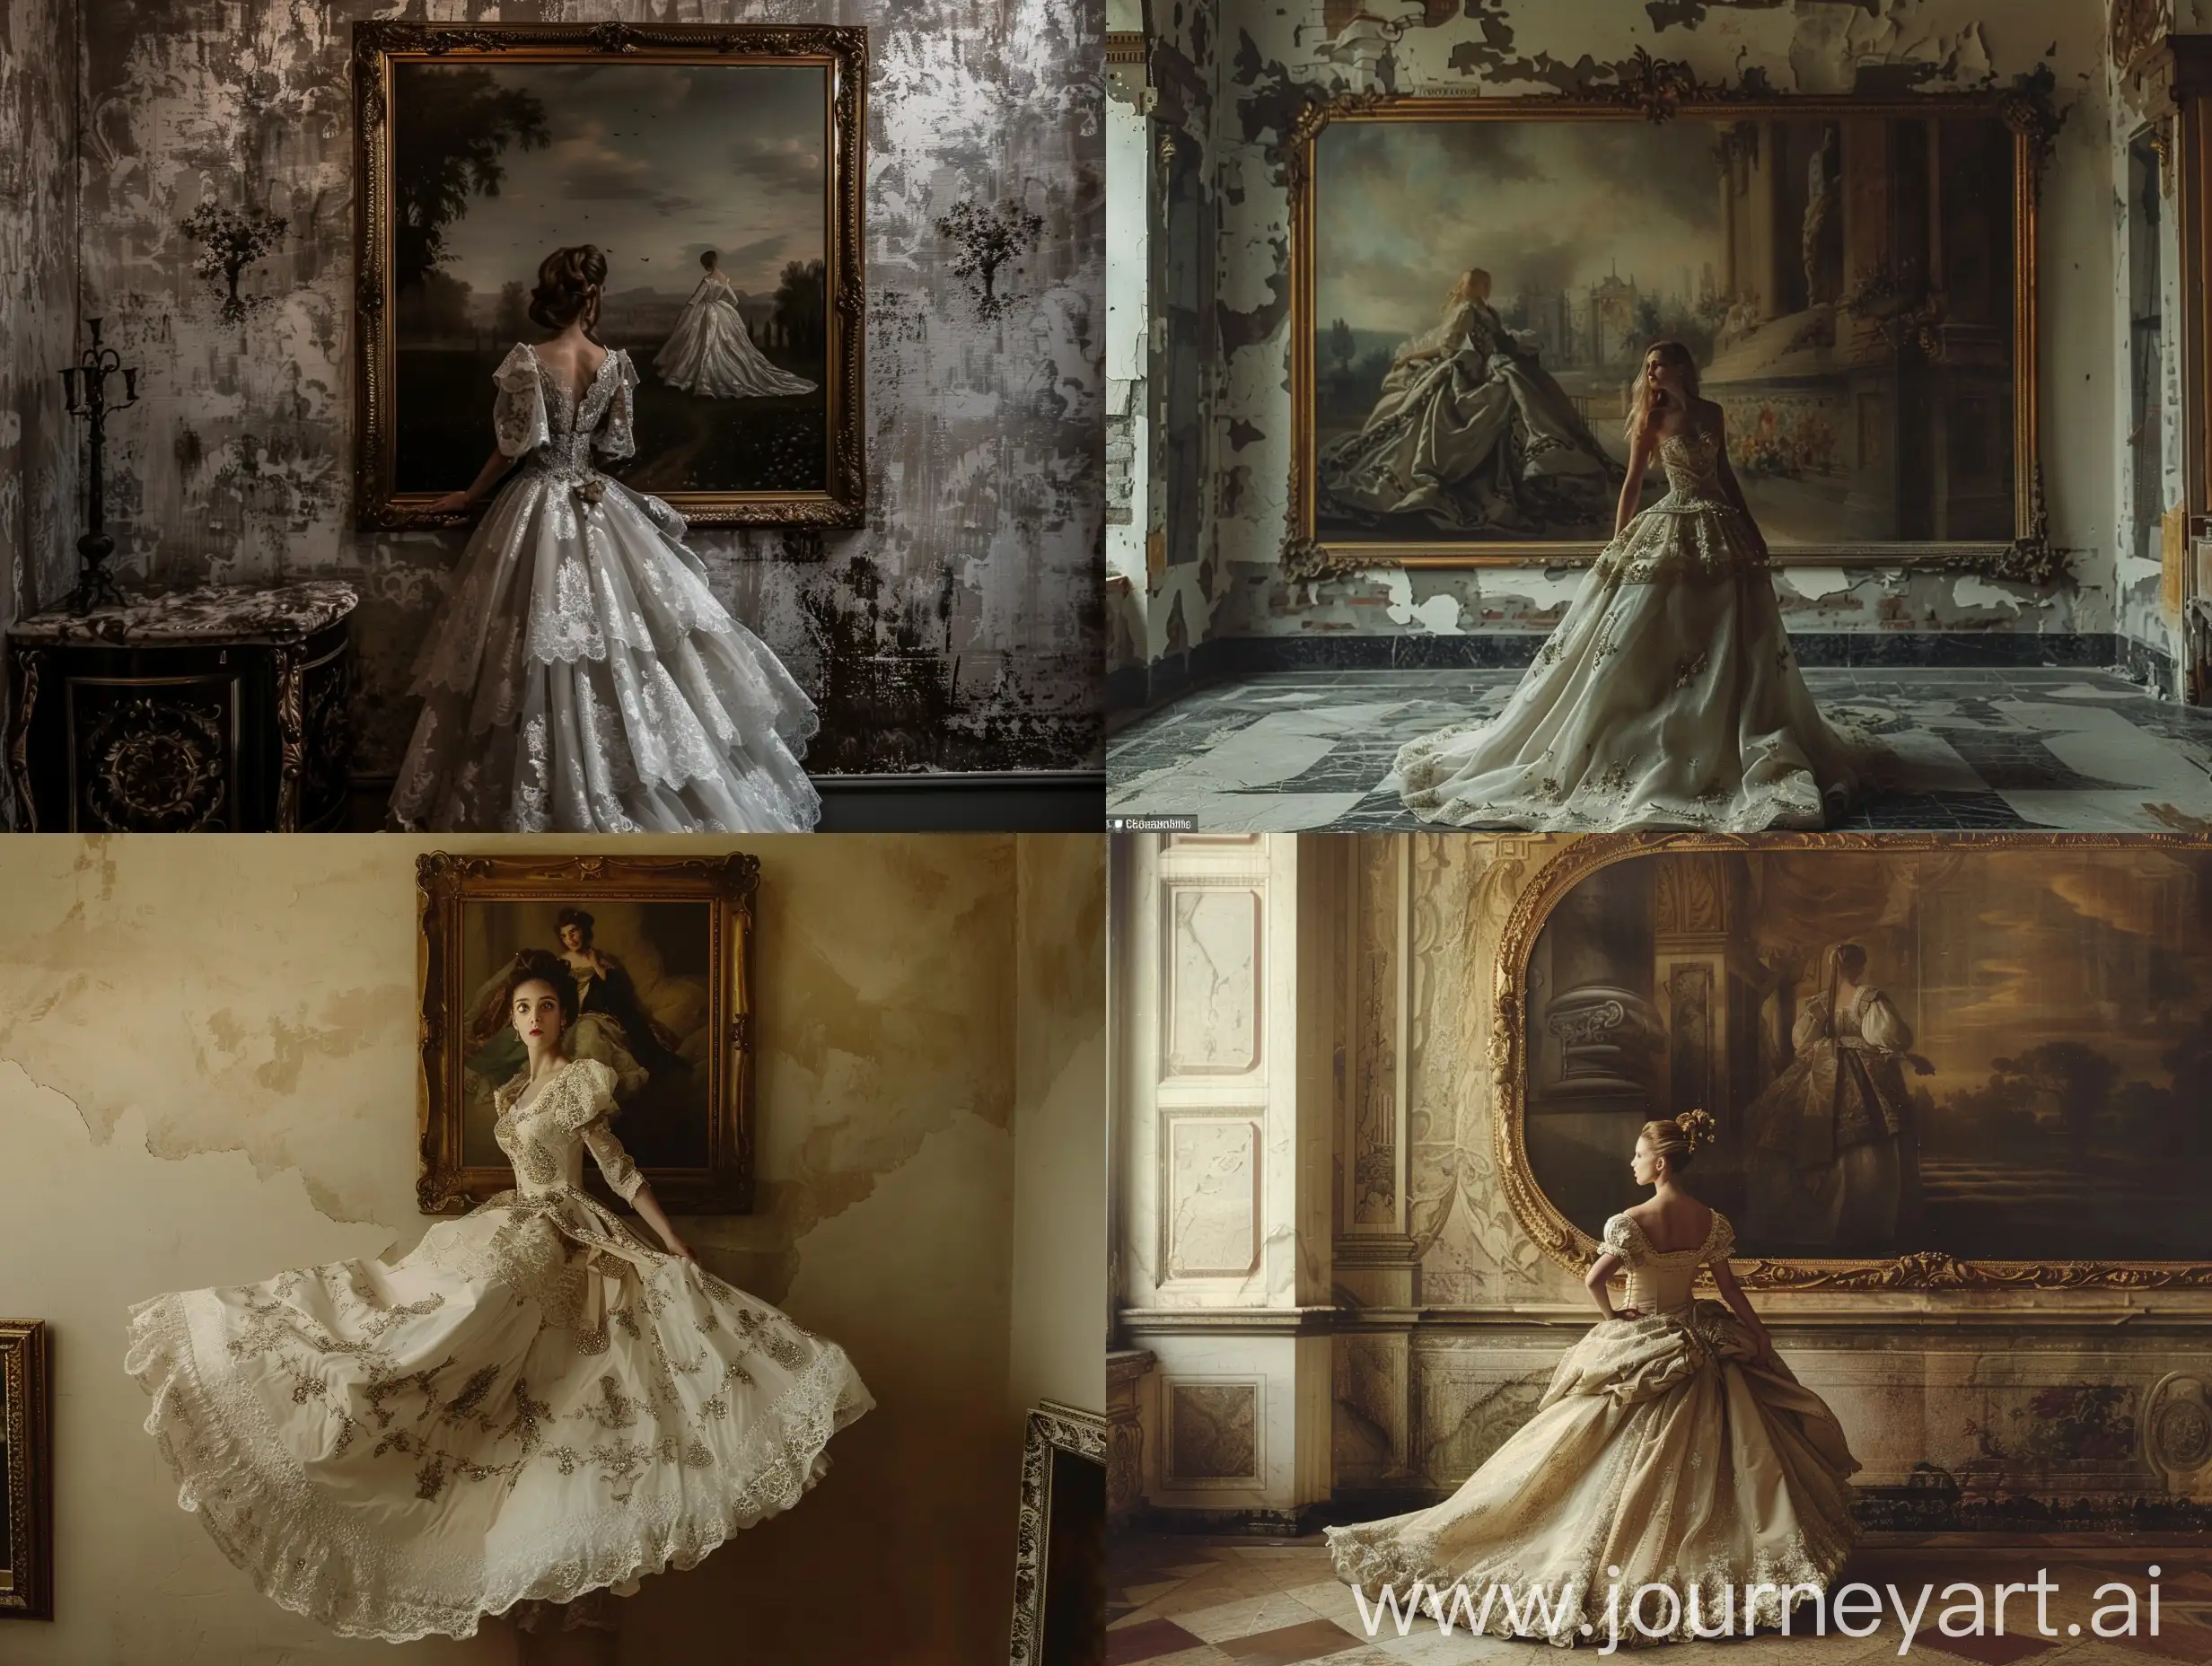 The photo captures the moment when a beautiful woman in an antique expensive dress steps down from a huge painting hanging on the wall into the real world and turns into a real woman, the moment of transition